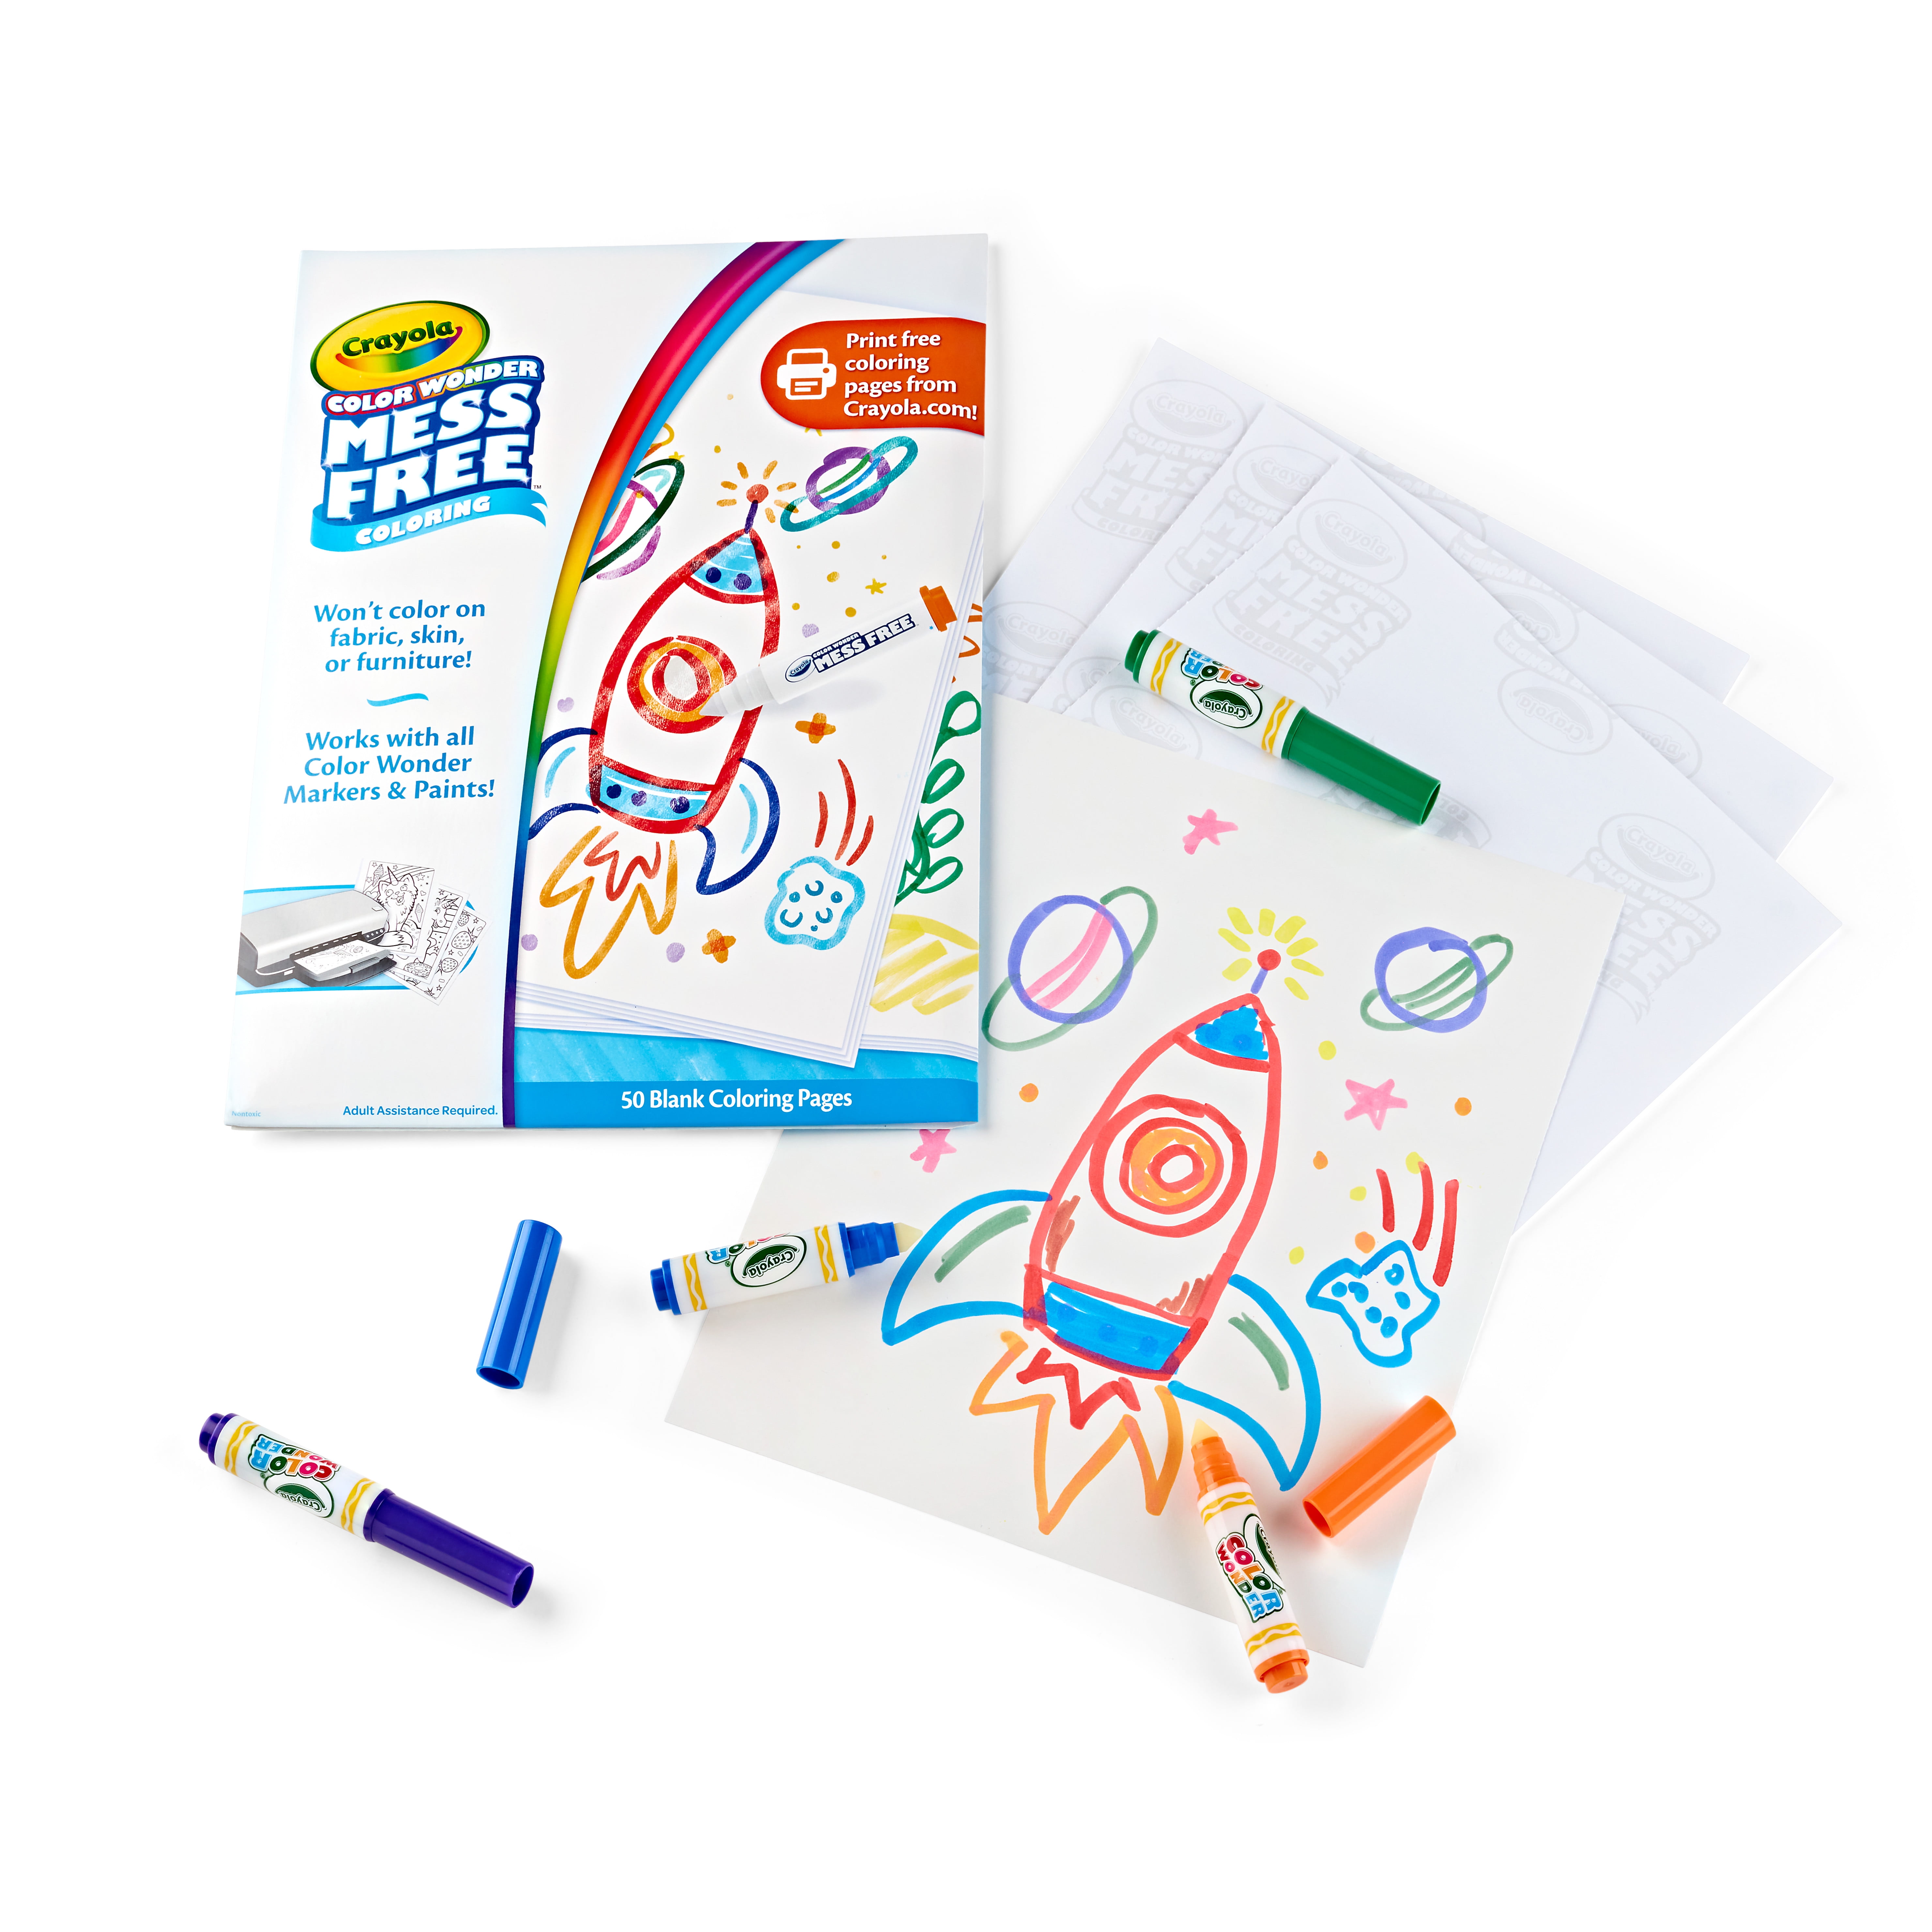 Crayola Color Wonder Mess Free Coloring, 50 Blank Coloring Pages, Printable  Page Refill Set, Child 